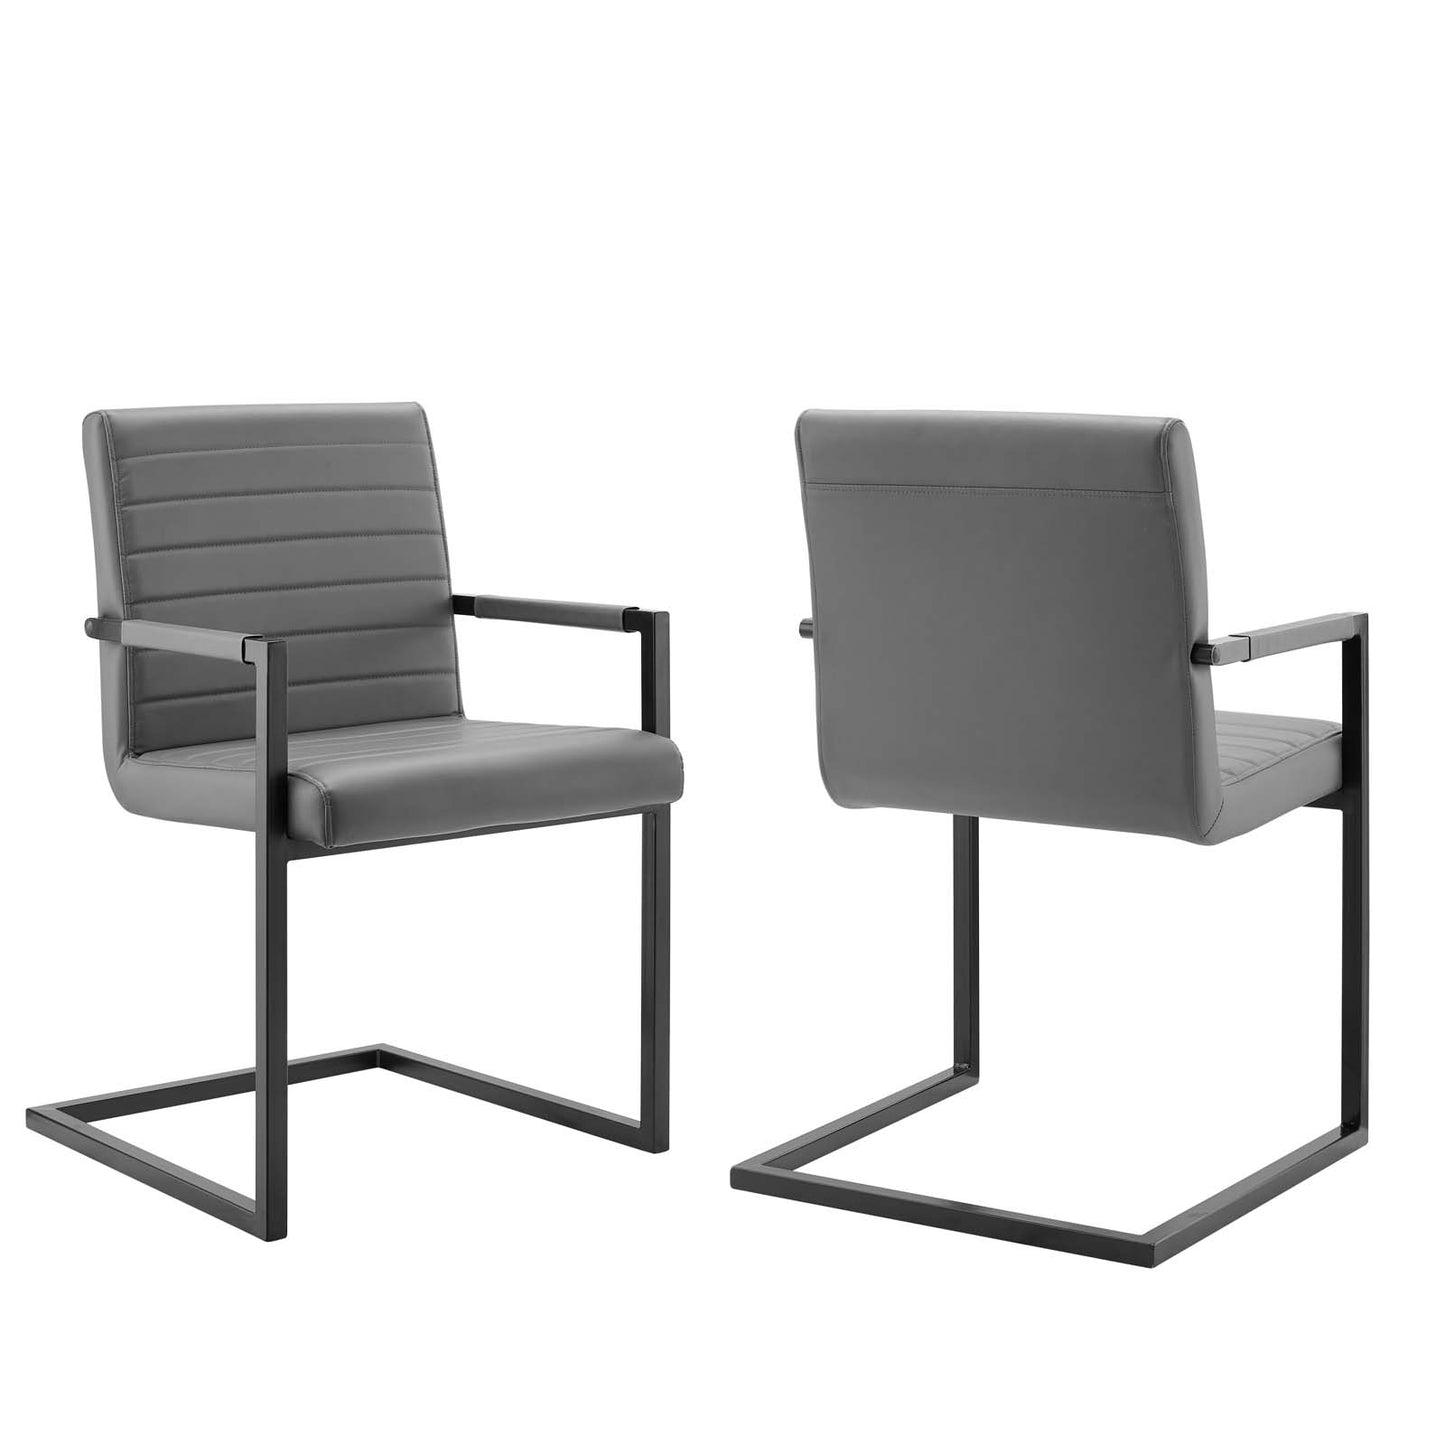 Savoy Vegan Leather Dining Chairs - Set of 2 Gray EEI-4522-GRY